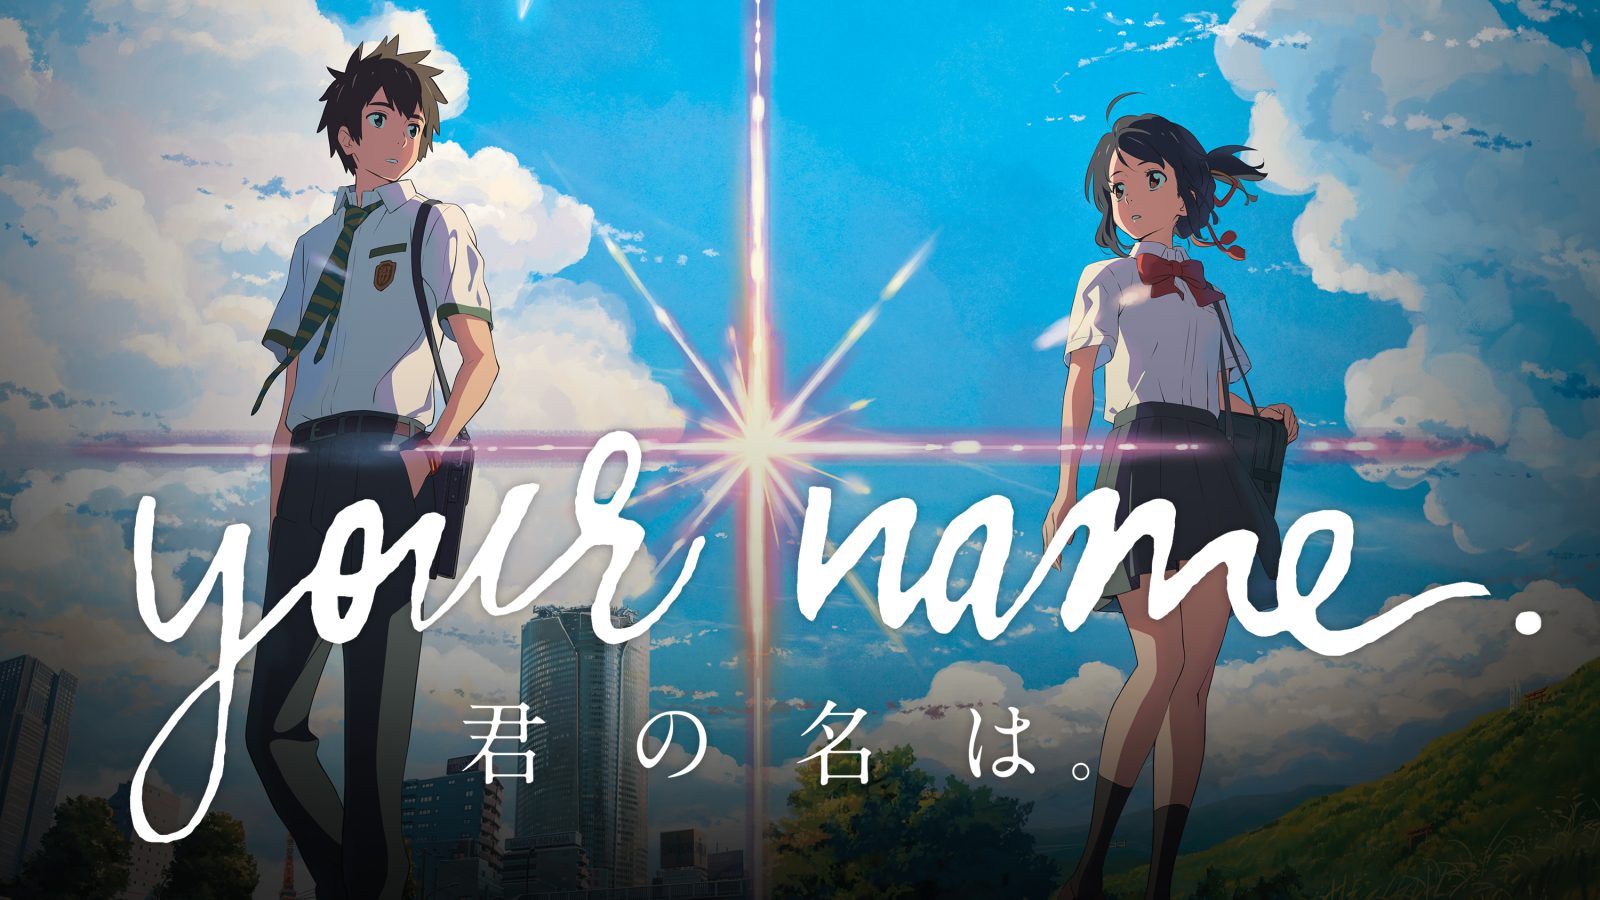 Download The Critically Acclaimed Your Name In Hd For 7 Other Anime On Sale From 4 9to5toys